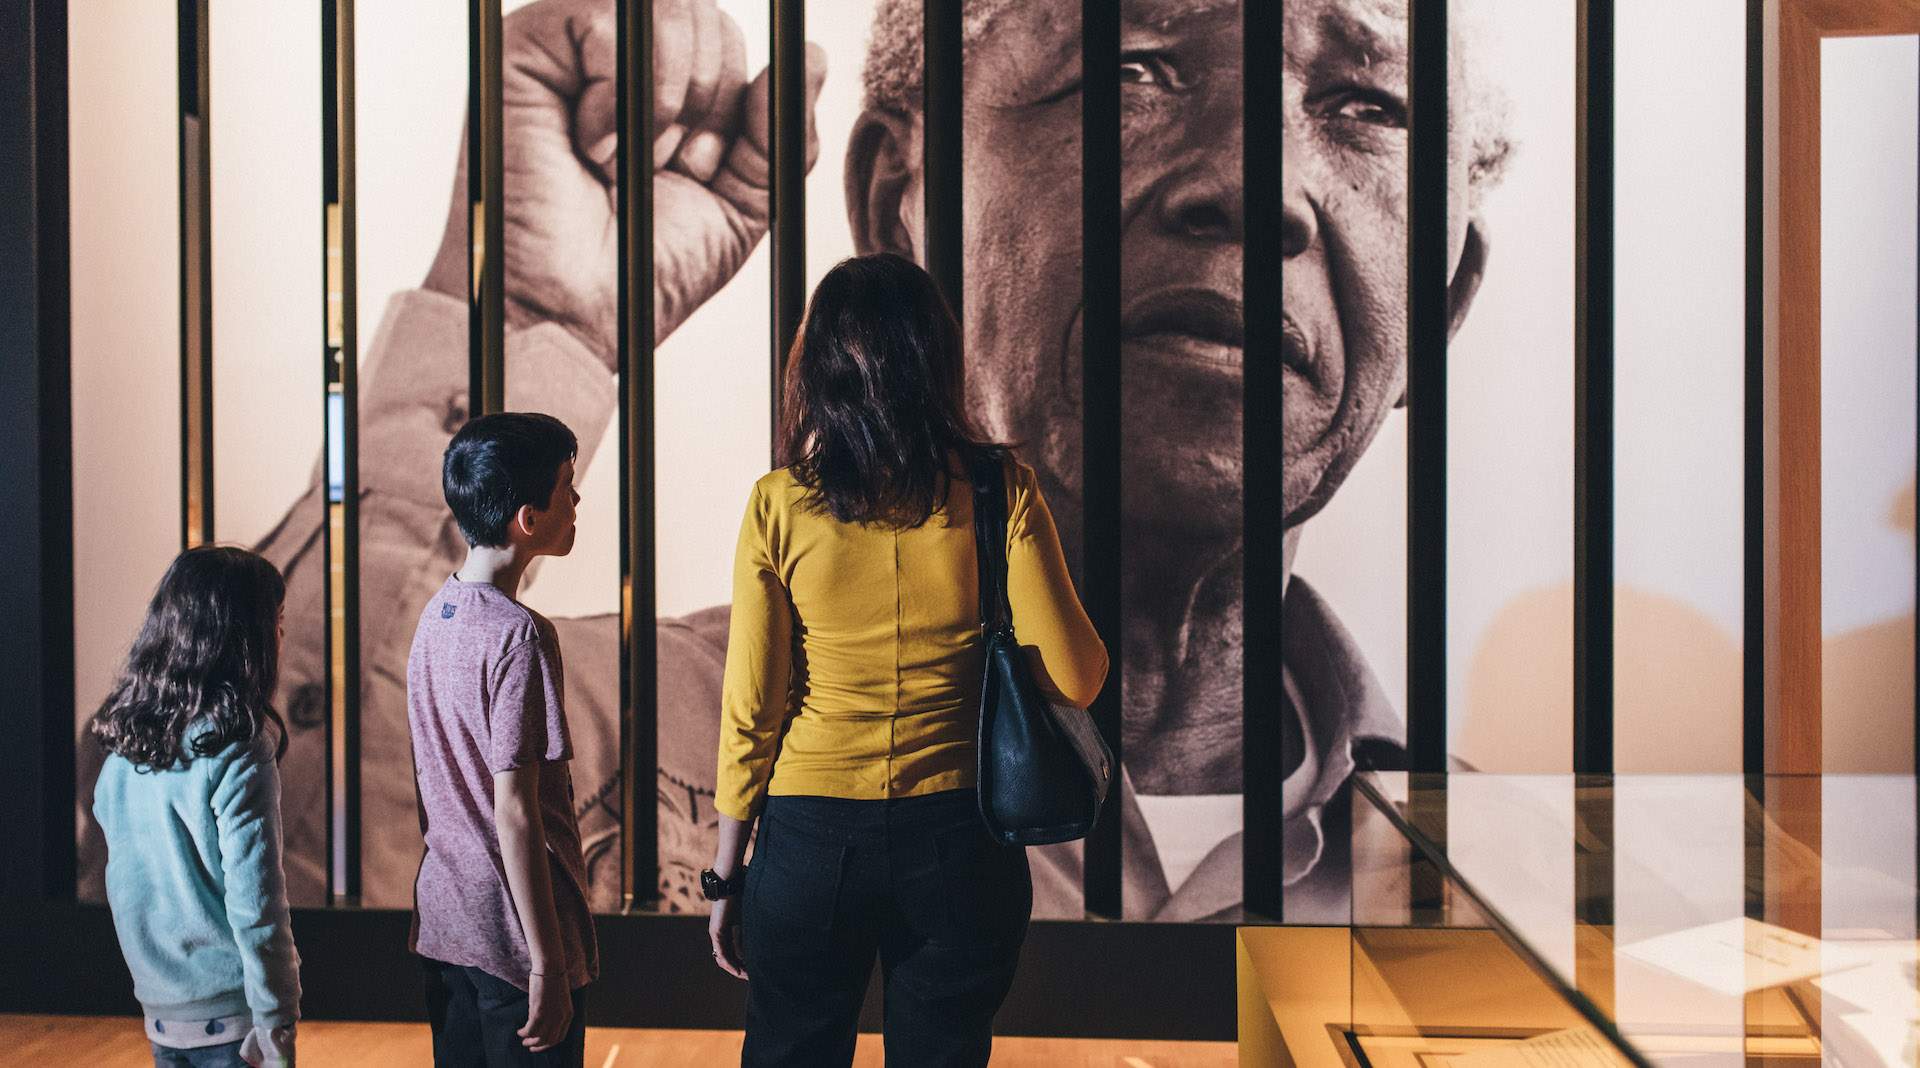 A Huge Nelson Mandela Exhibition Is Coming to New Zealand